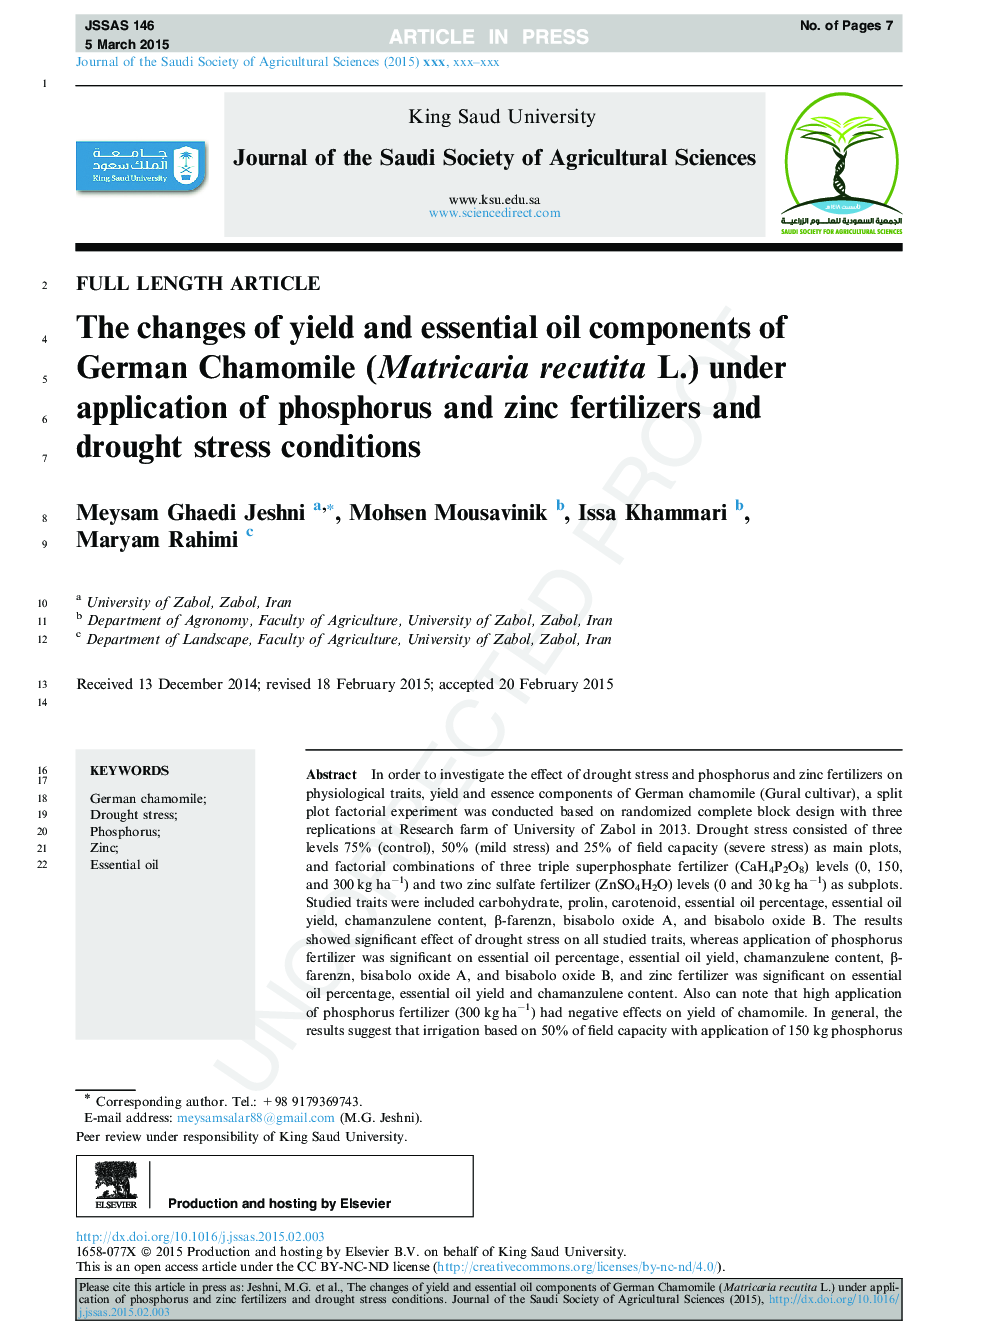 The changes of yield and essential oil components of German Chamomile (Matricaria recutita L.) under application of phosphorus and zinc fertilizers and drought stress conditions